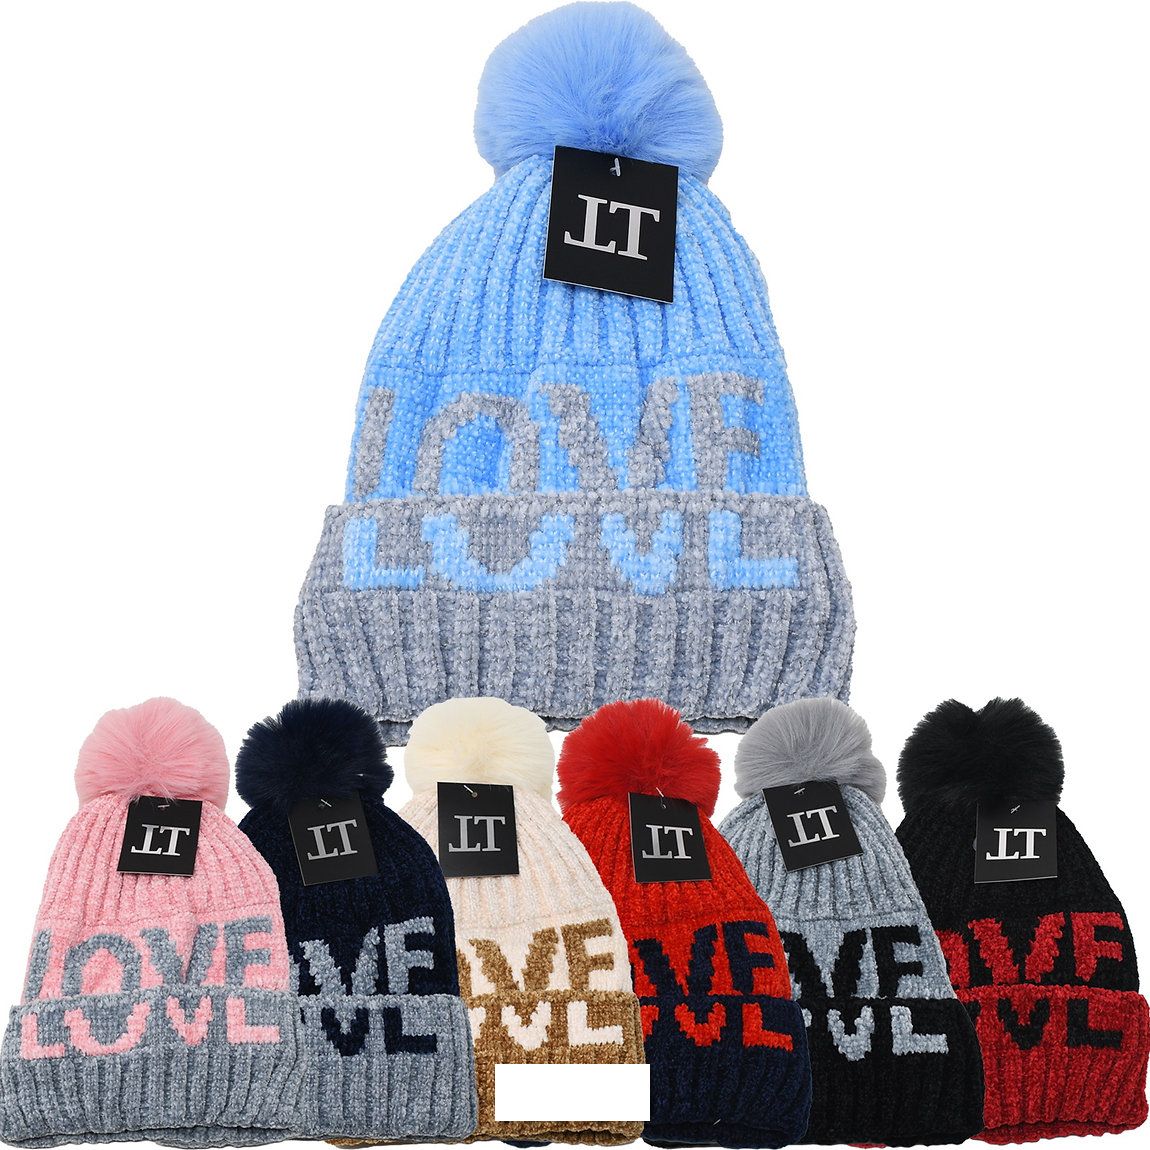 12 Pieces of Women's Winter Fur Lining Love Style Hats With Pompoms In Assorted Colors